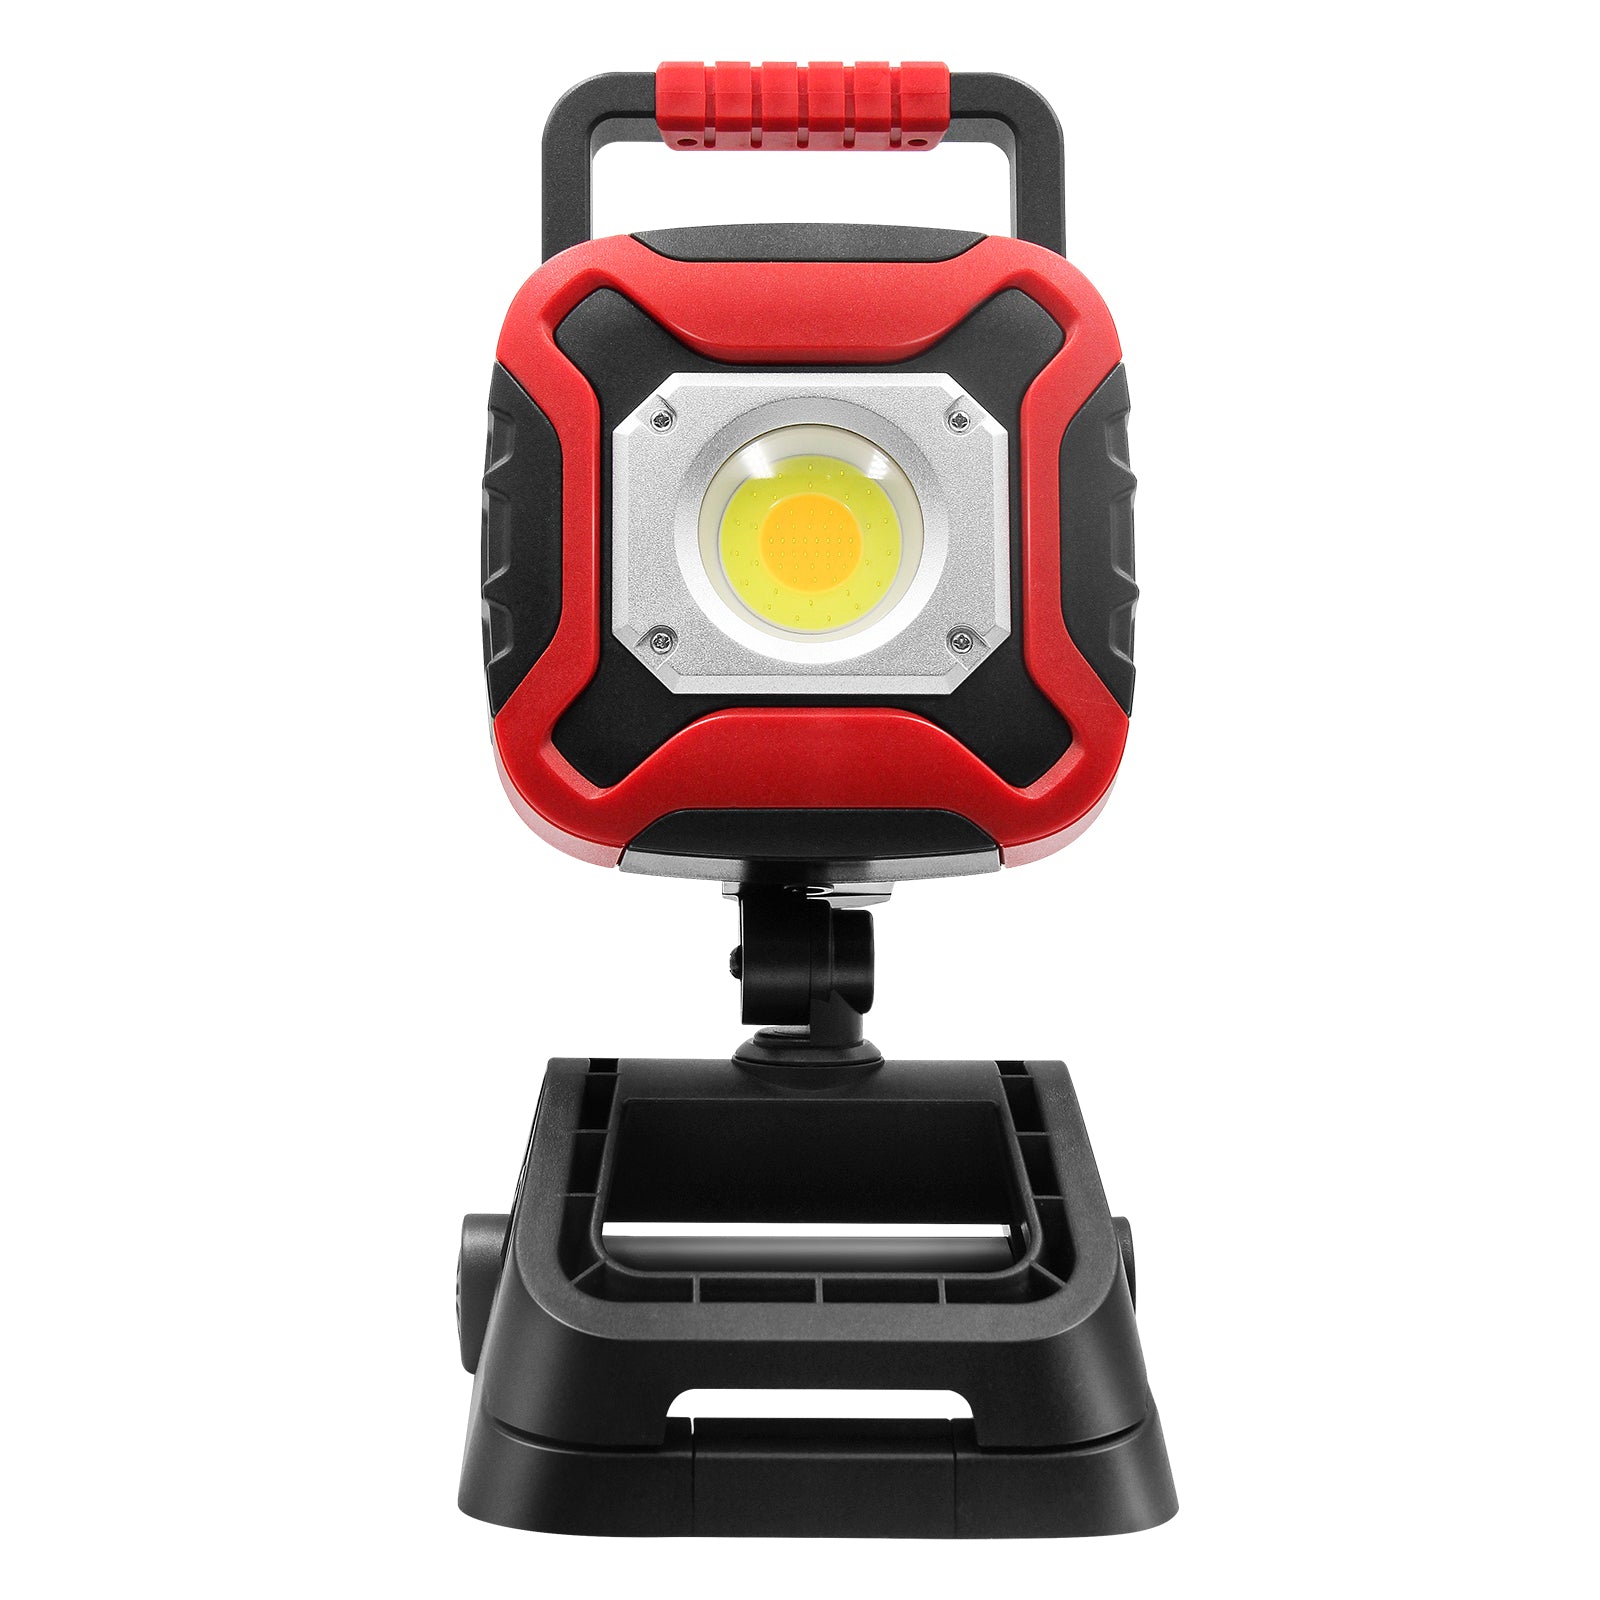 Rechargeable COB Work Light with 20W 1500LM Adjustable Brightness Magnetic Clamp Base and Power Bank